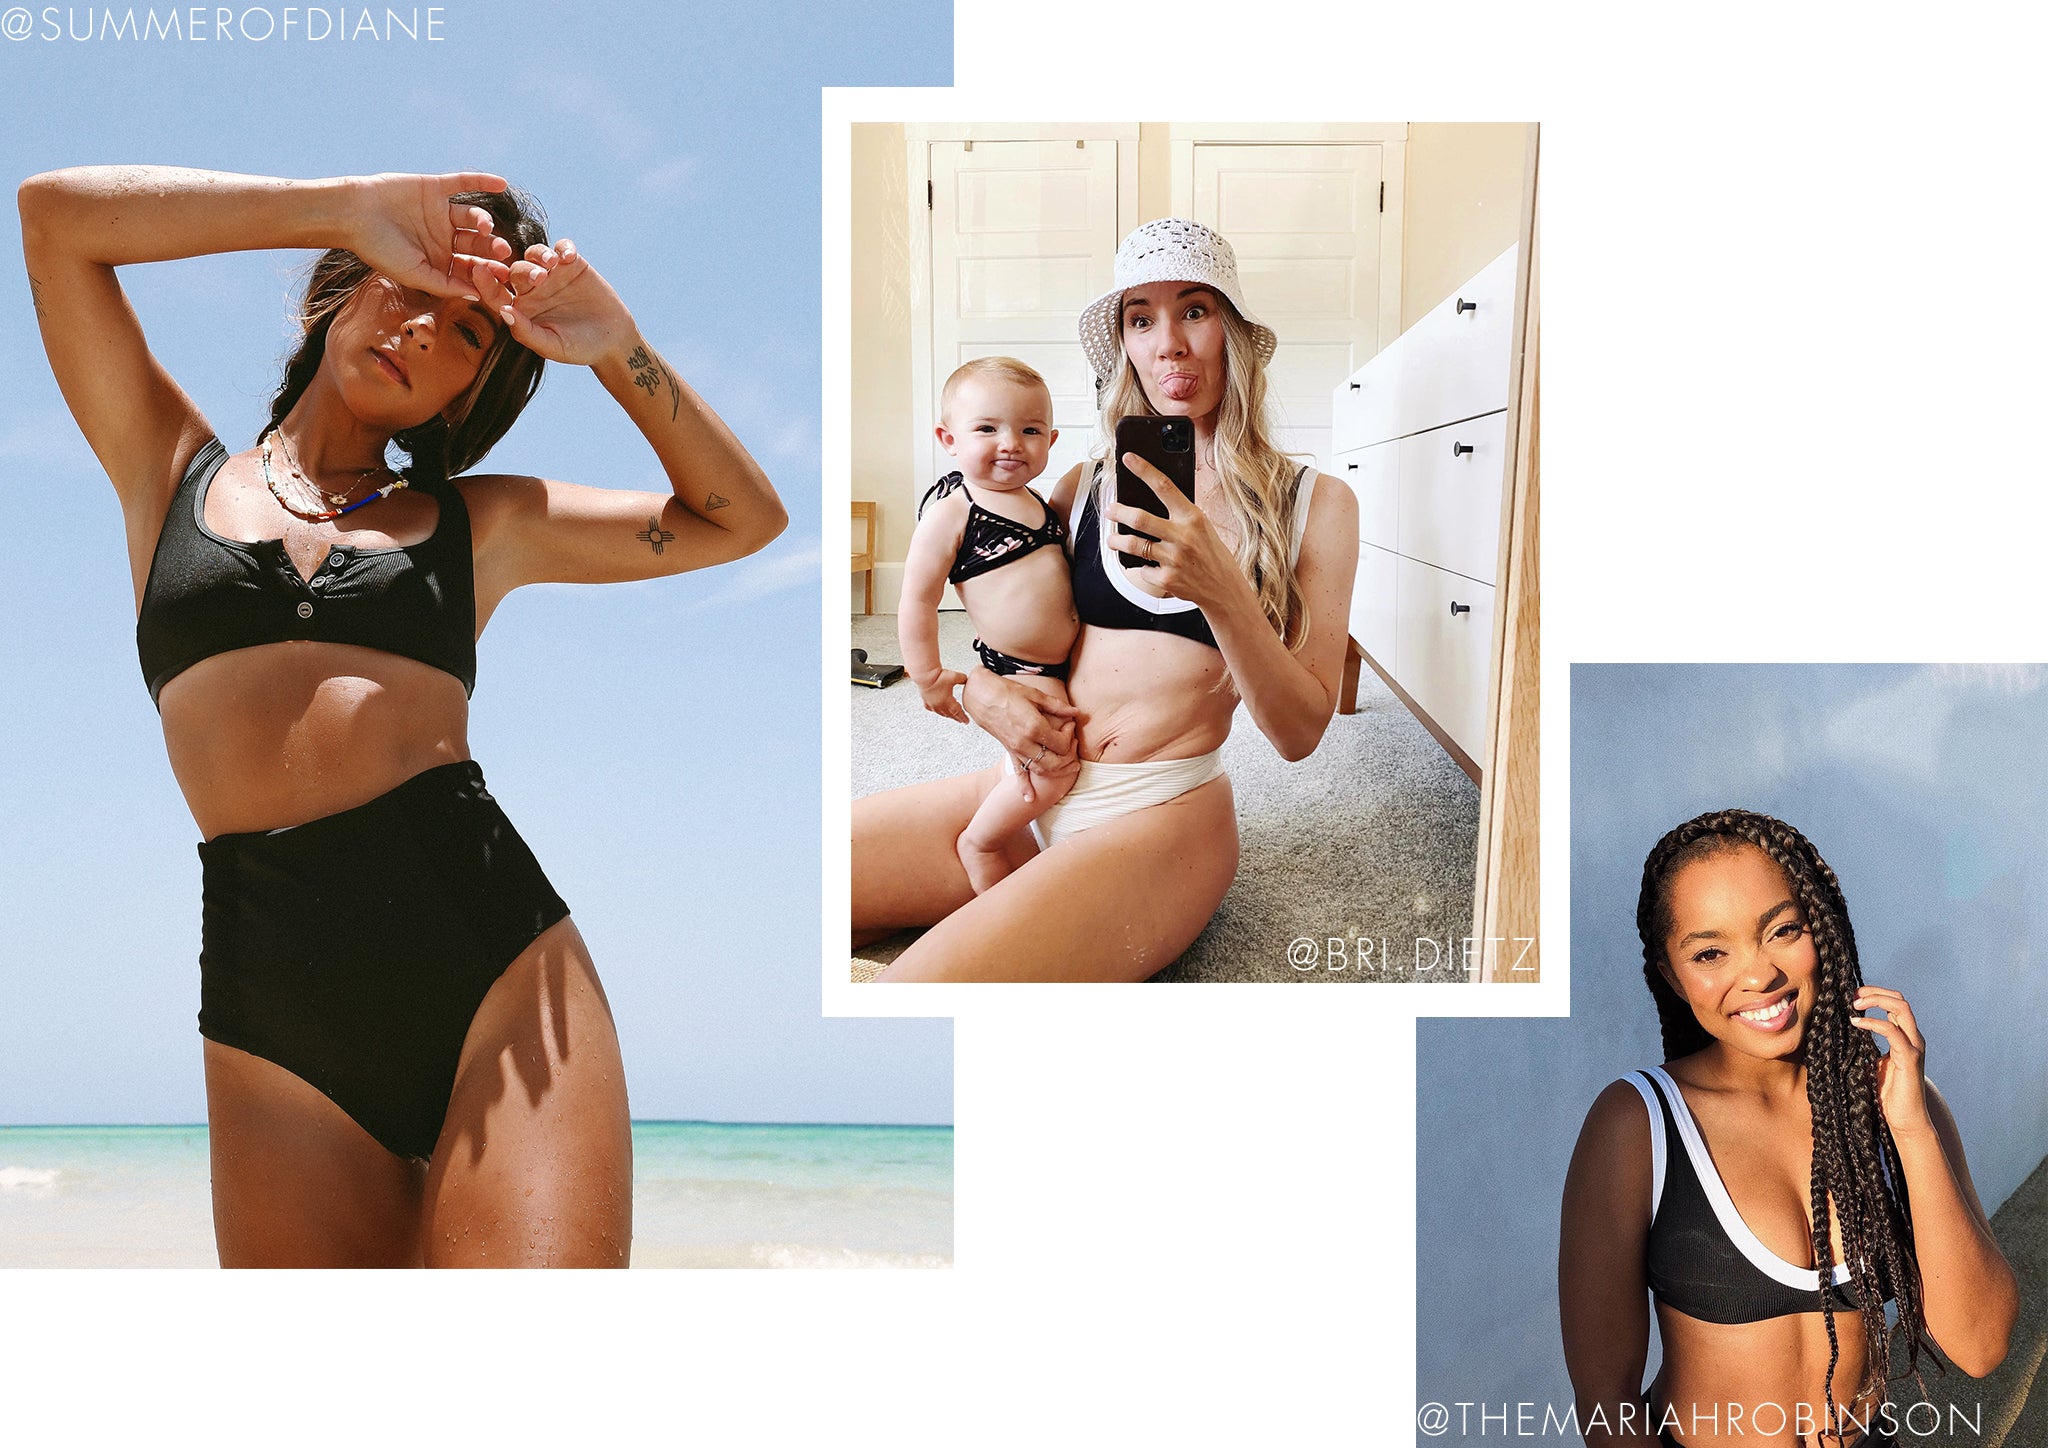 images from instagram of summer of diane, mariah robinson, and bri dietz wearing lspace